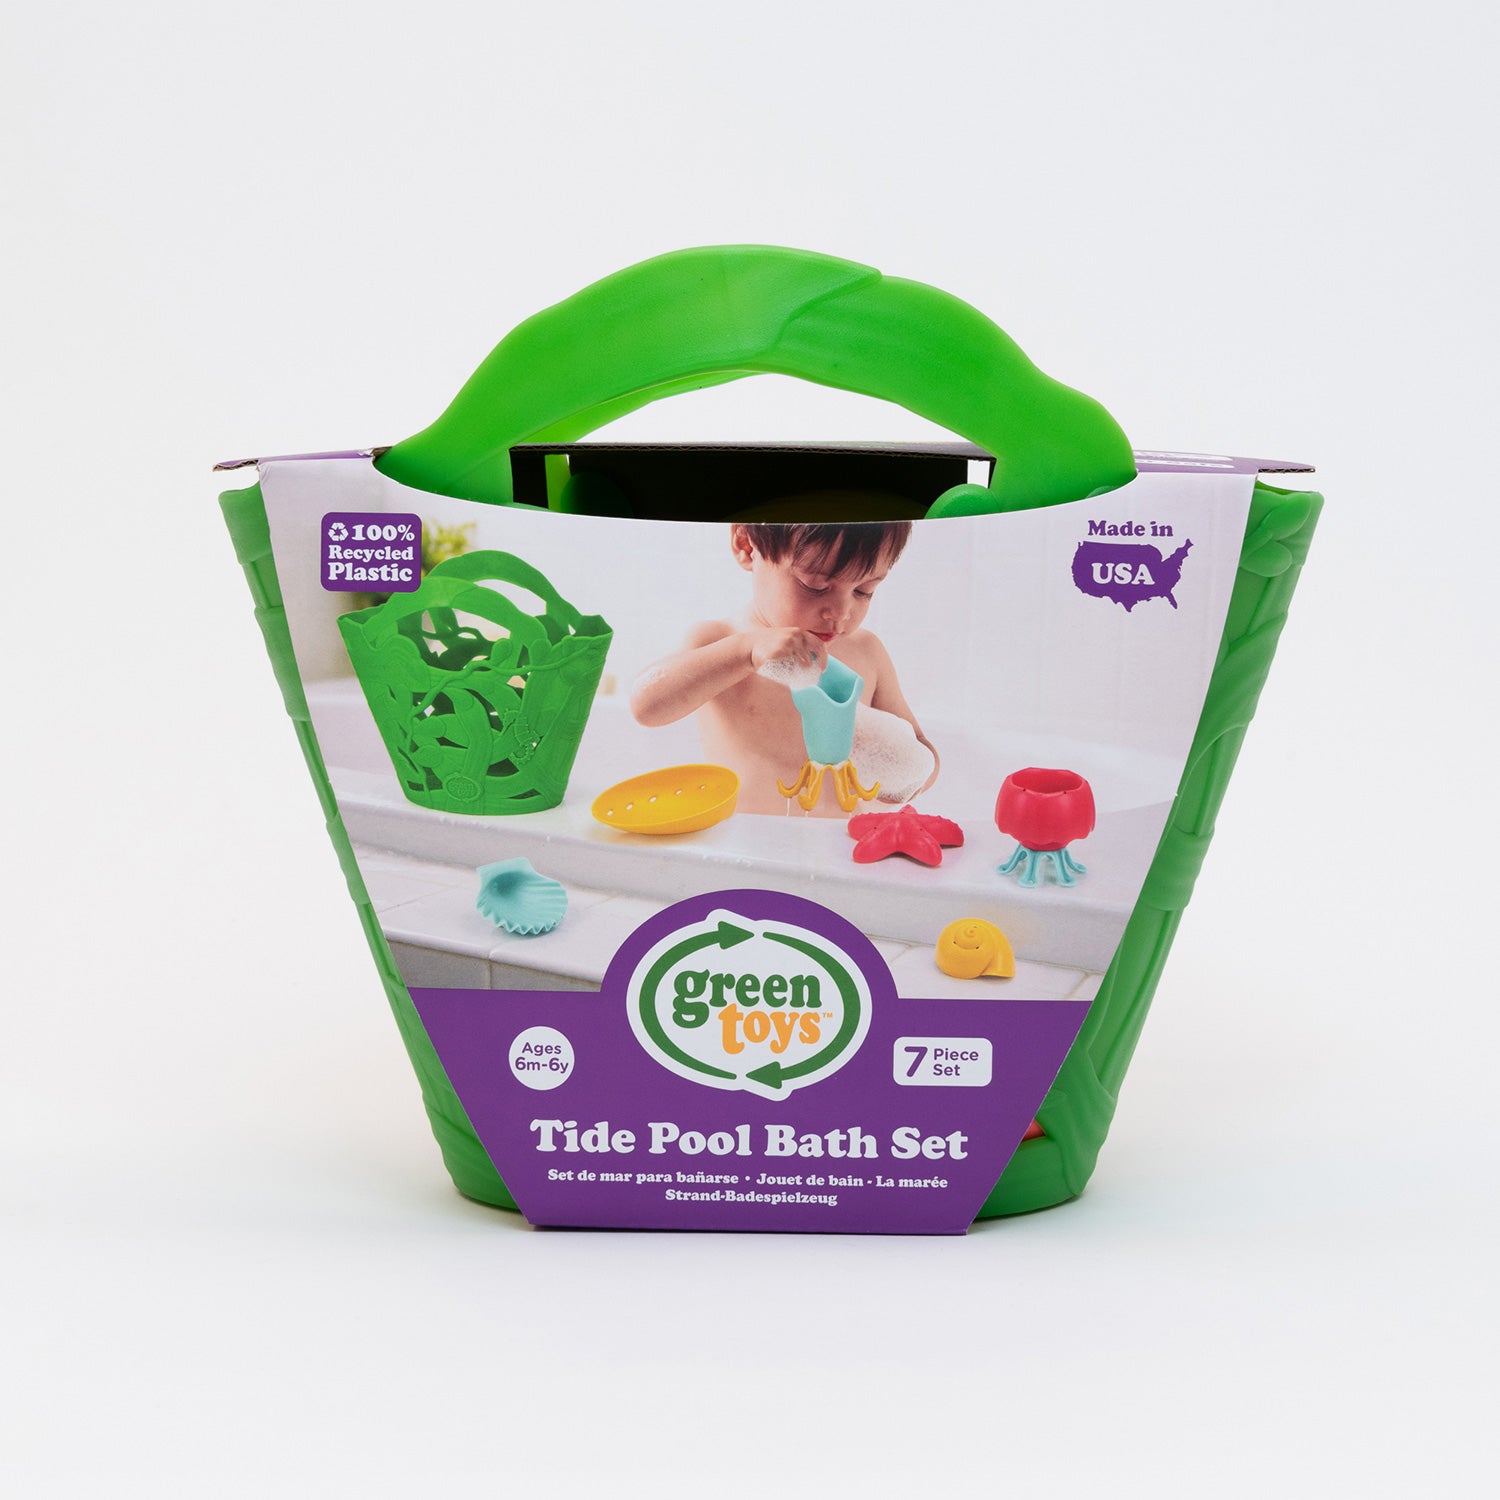 Green Toys Tide Pool Bath Set. Green Plastic seaweed bucket with coloured plastic sealife toys 7 peice set. In cardboard sleeve depicting a small child playing in the bath with these toys.